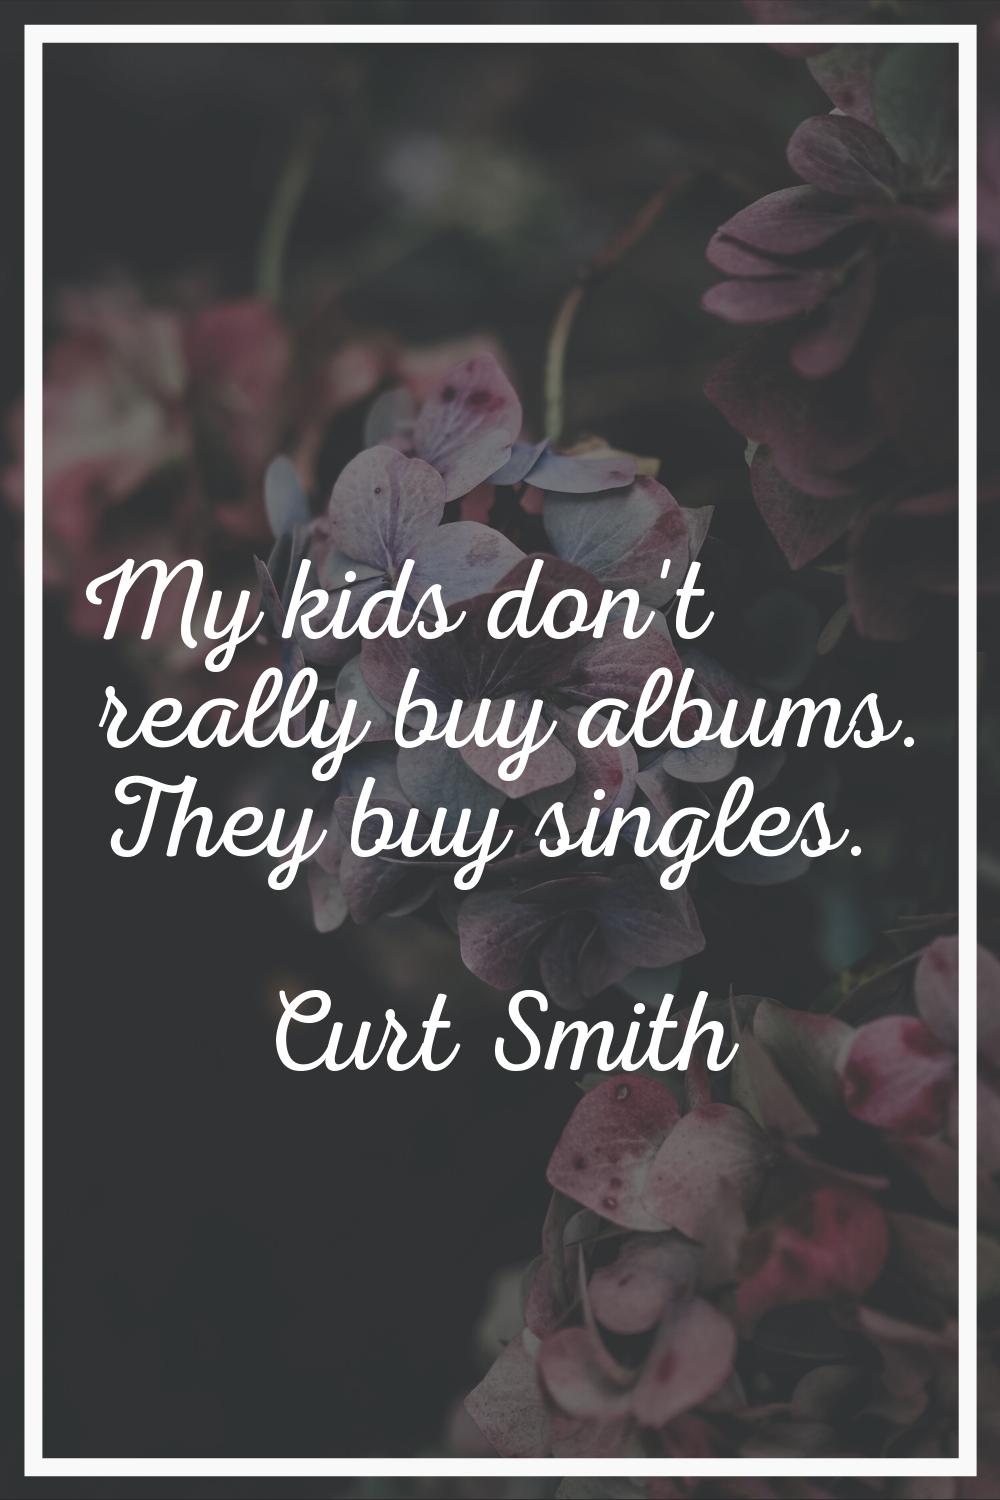 My kids don't really buy albums. They buy singles.